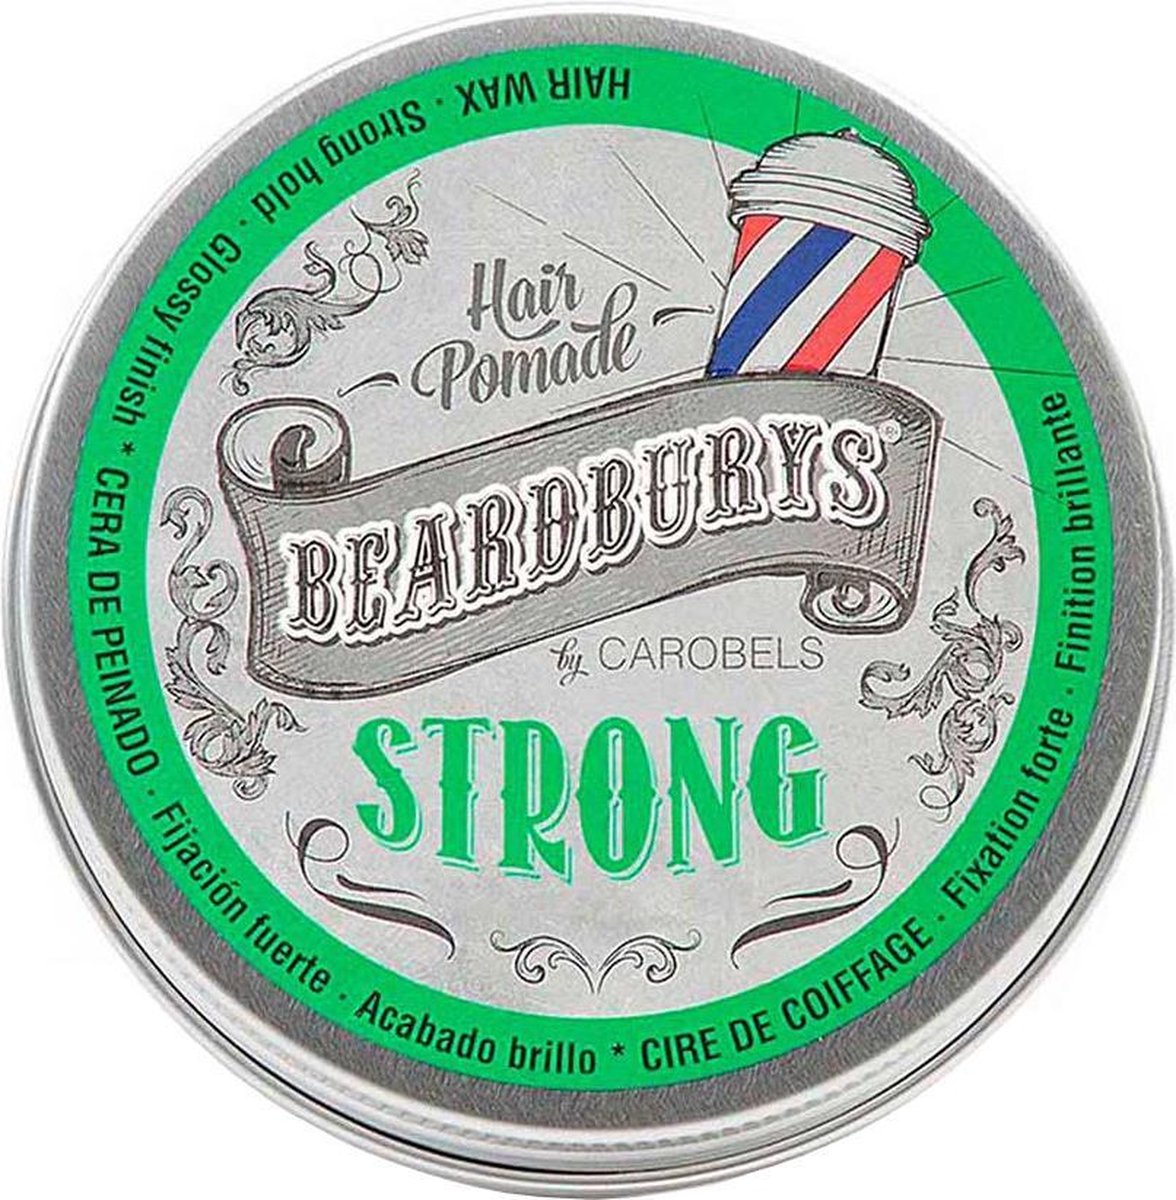 Pomade Strong Travel